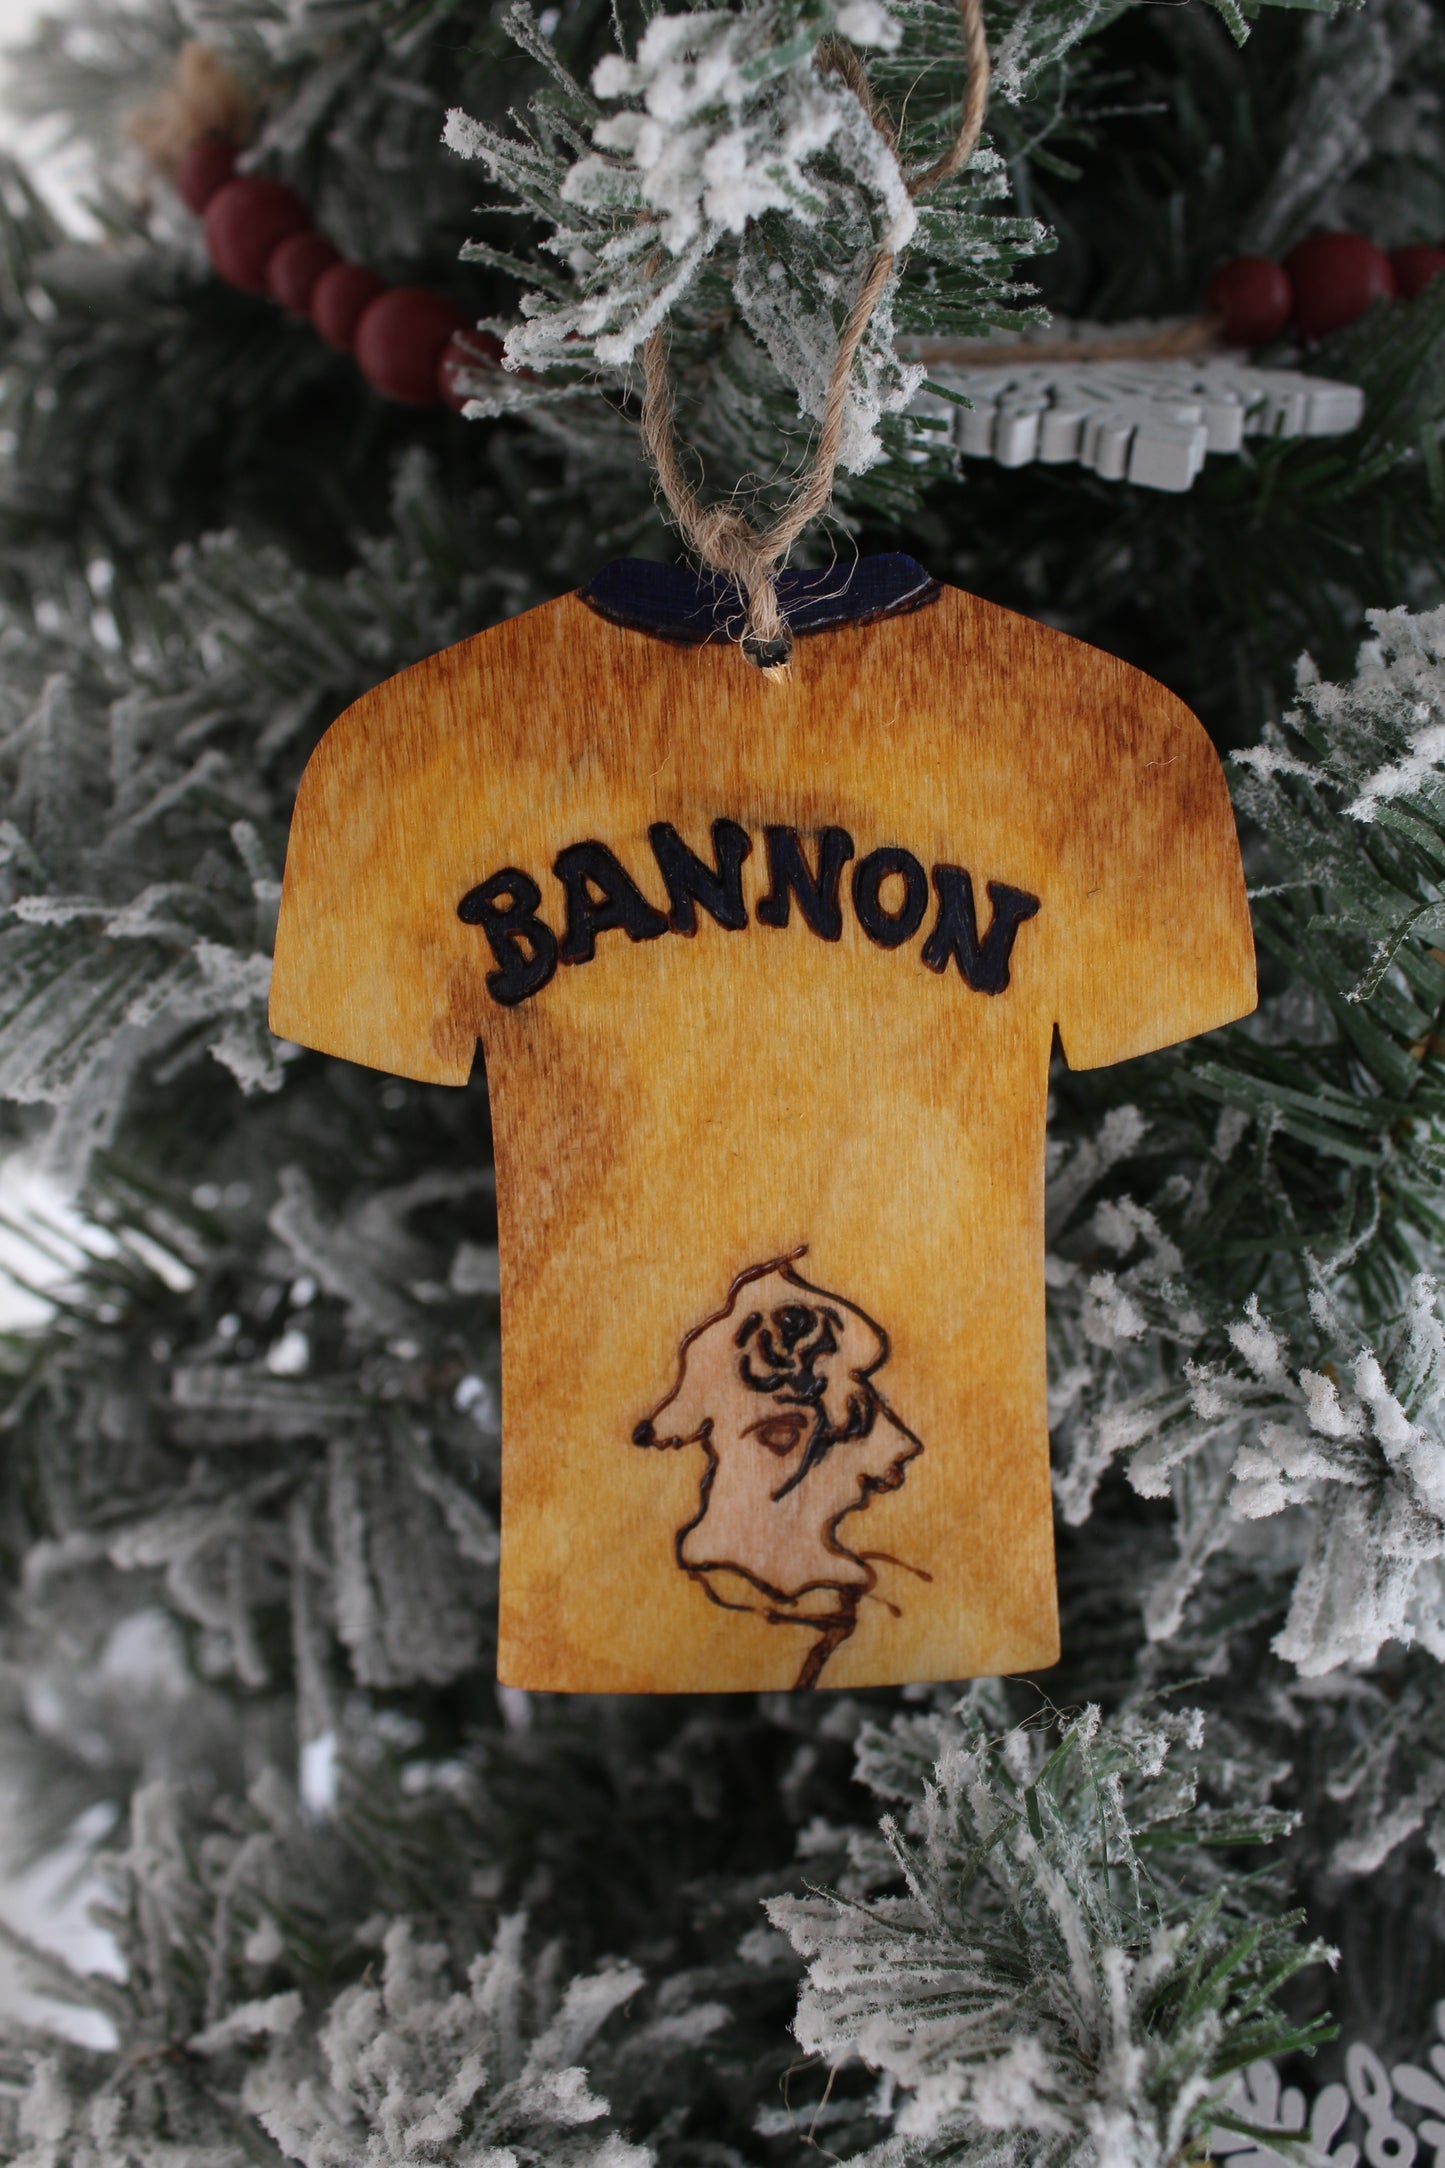 Jeepers Creepers Darry Bannon Shirt Ornament